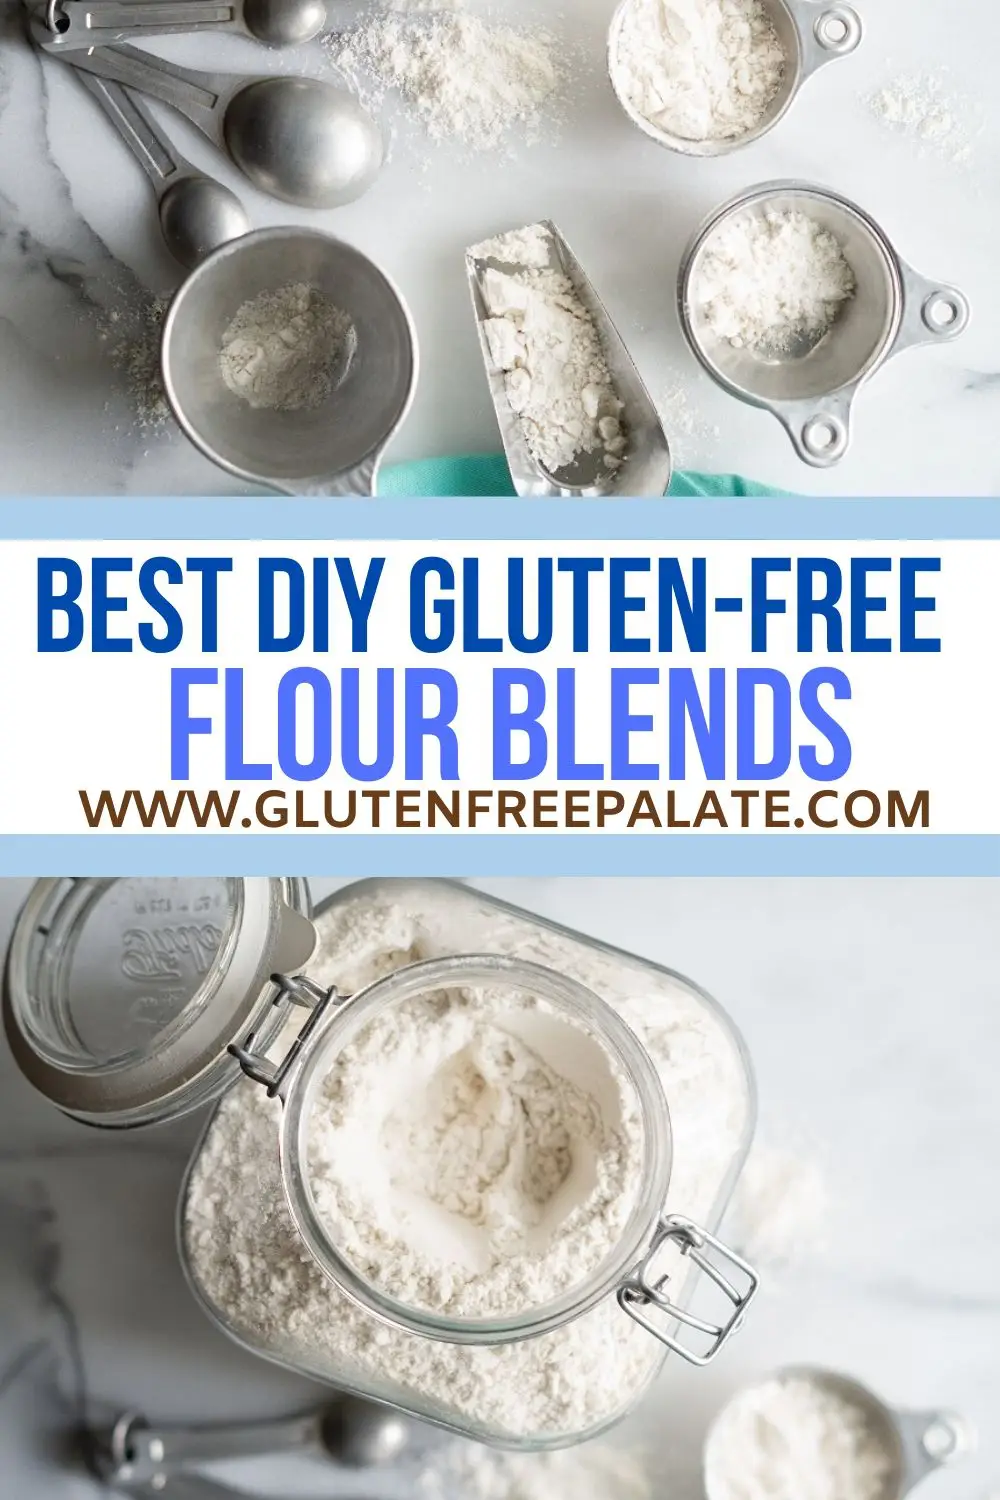 a pinterest pin collage of jars of gluten free flour with the words best diy gluten-free flour blends in text in the center